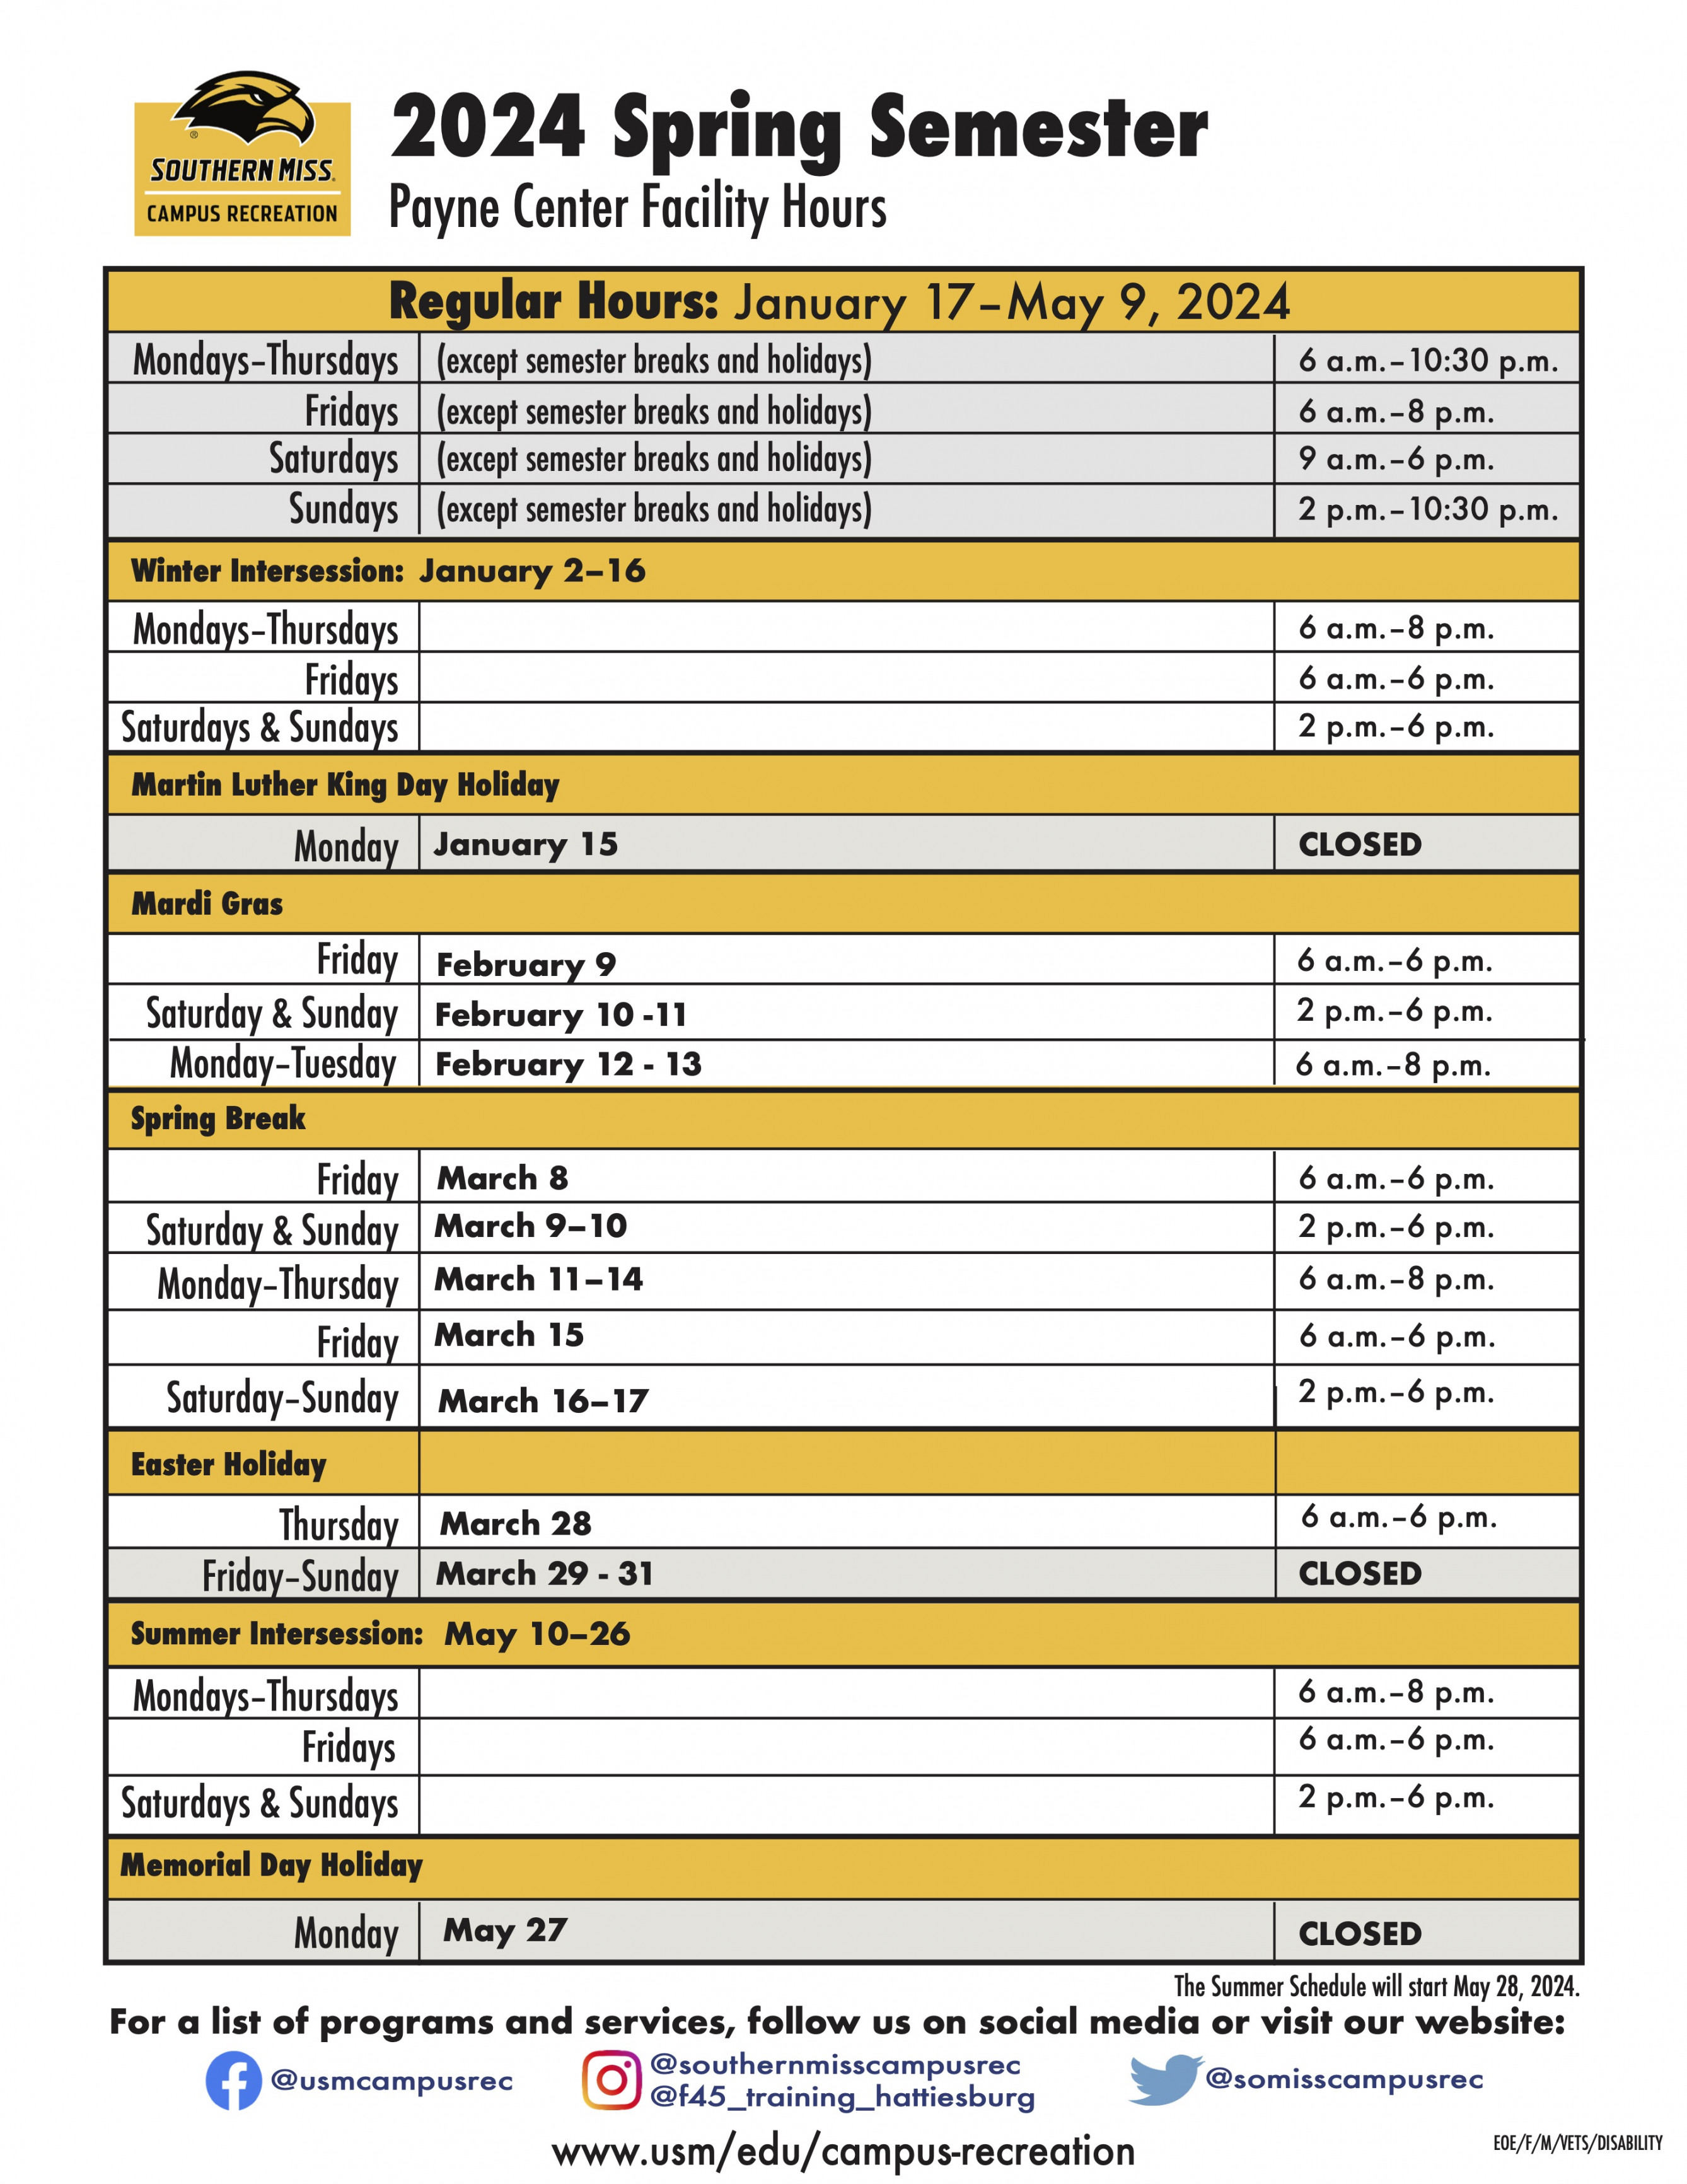 Schedules  Campus Recreation  The University of Southern Mississippi